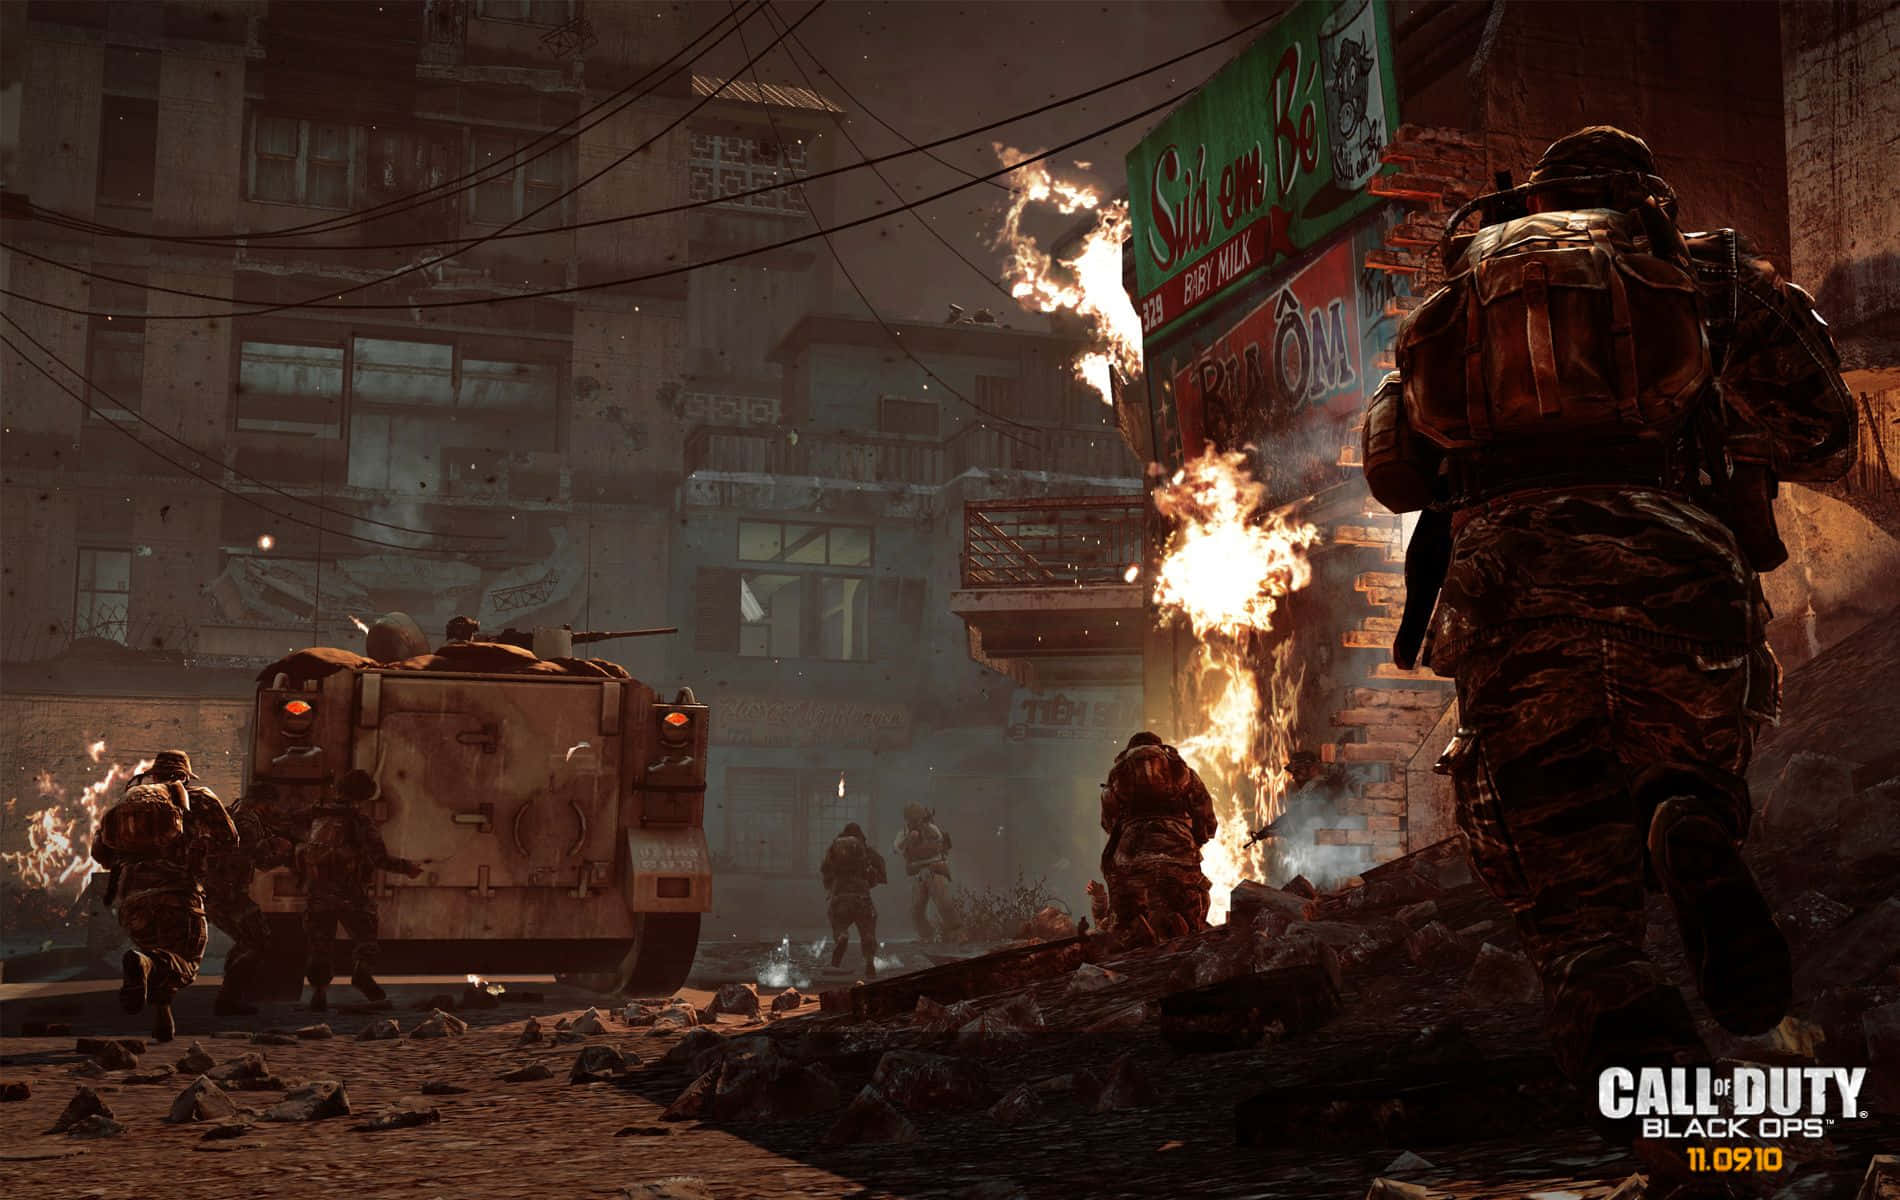 Experience an Epic First Person Shooter in Call of Duty Black Ops Wallpaper